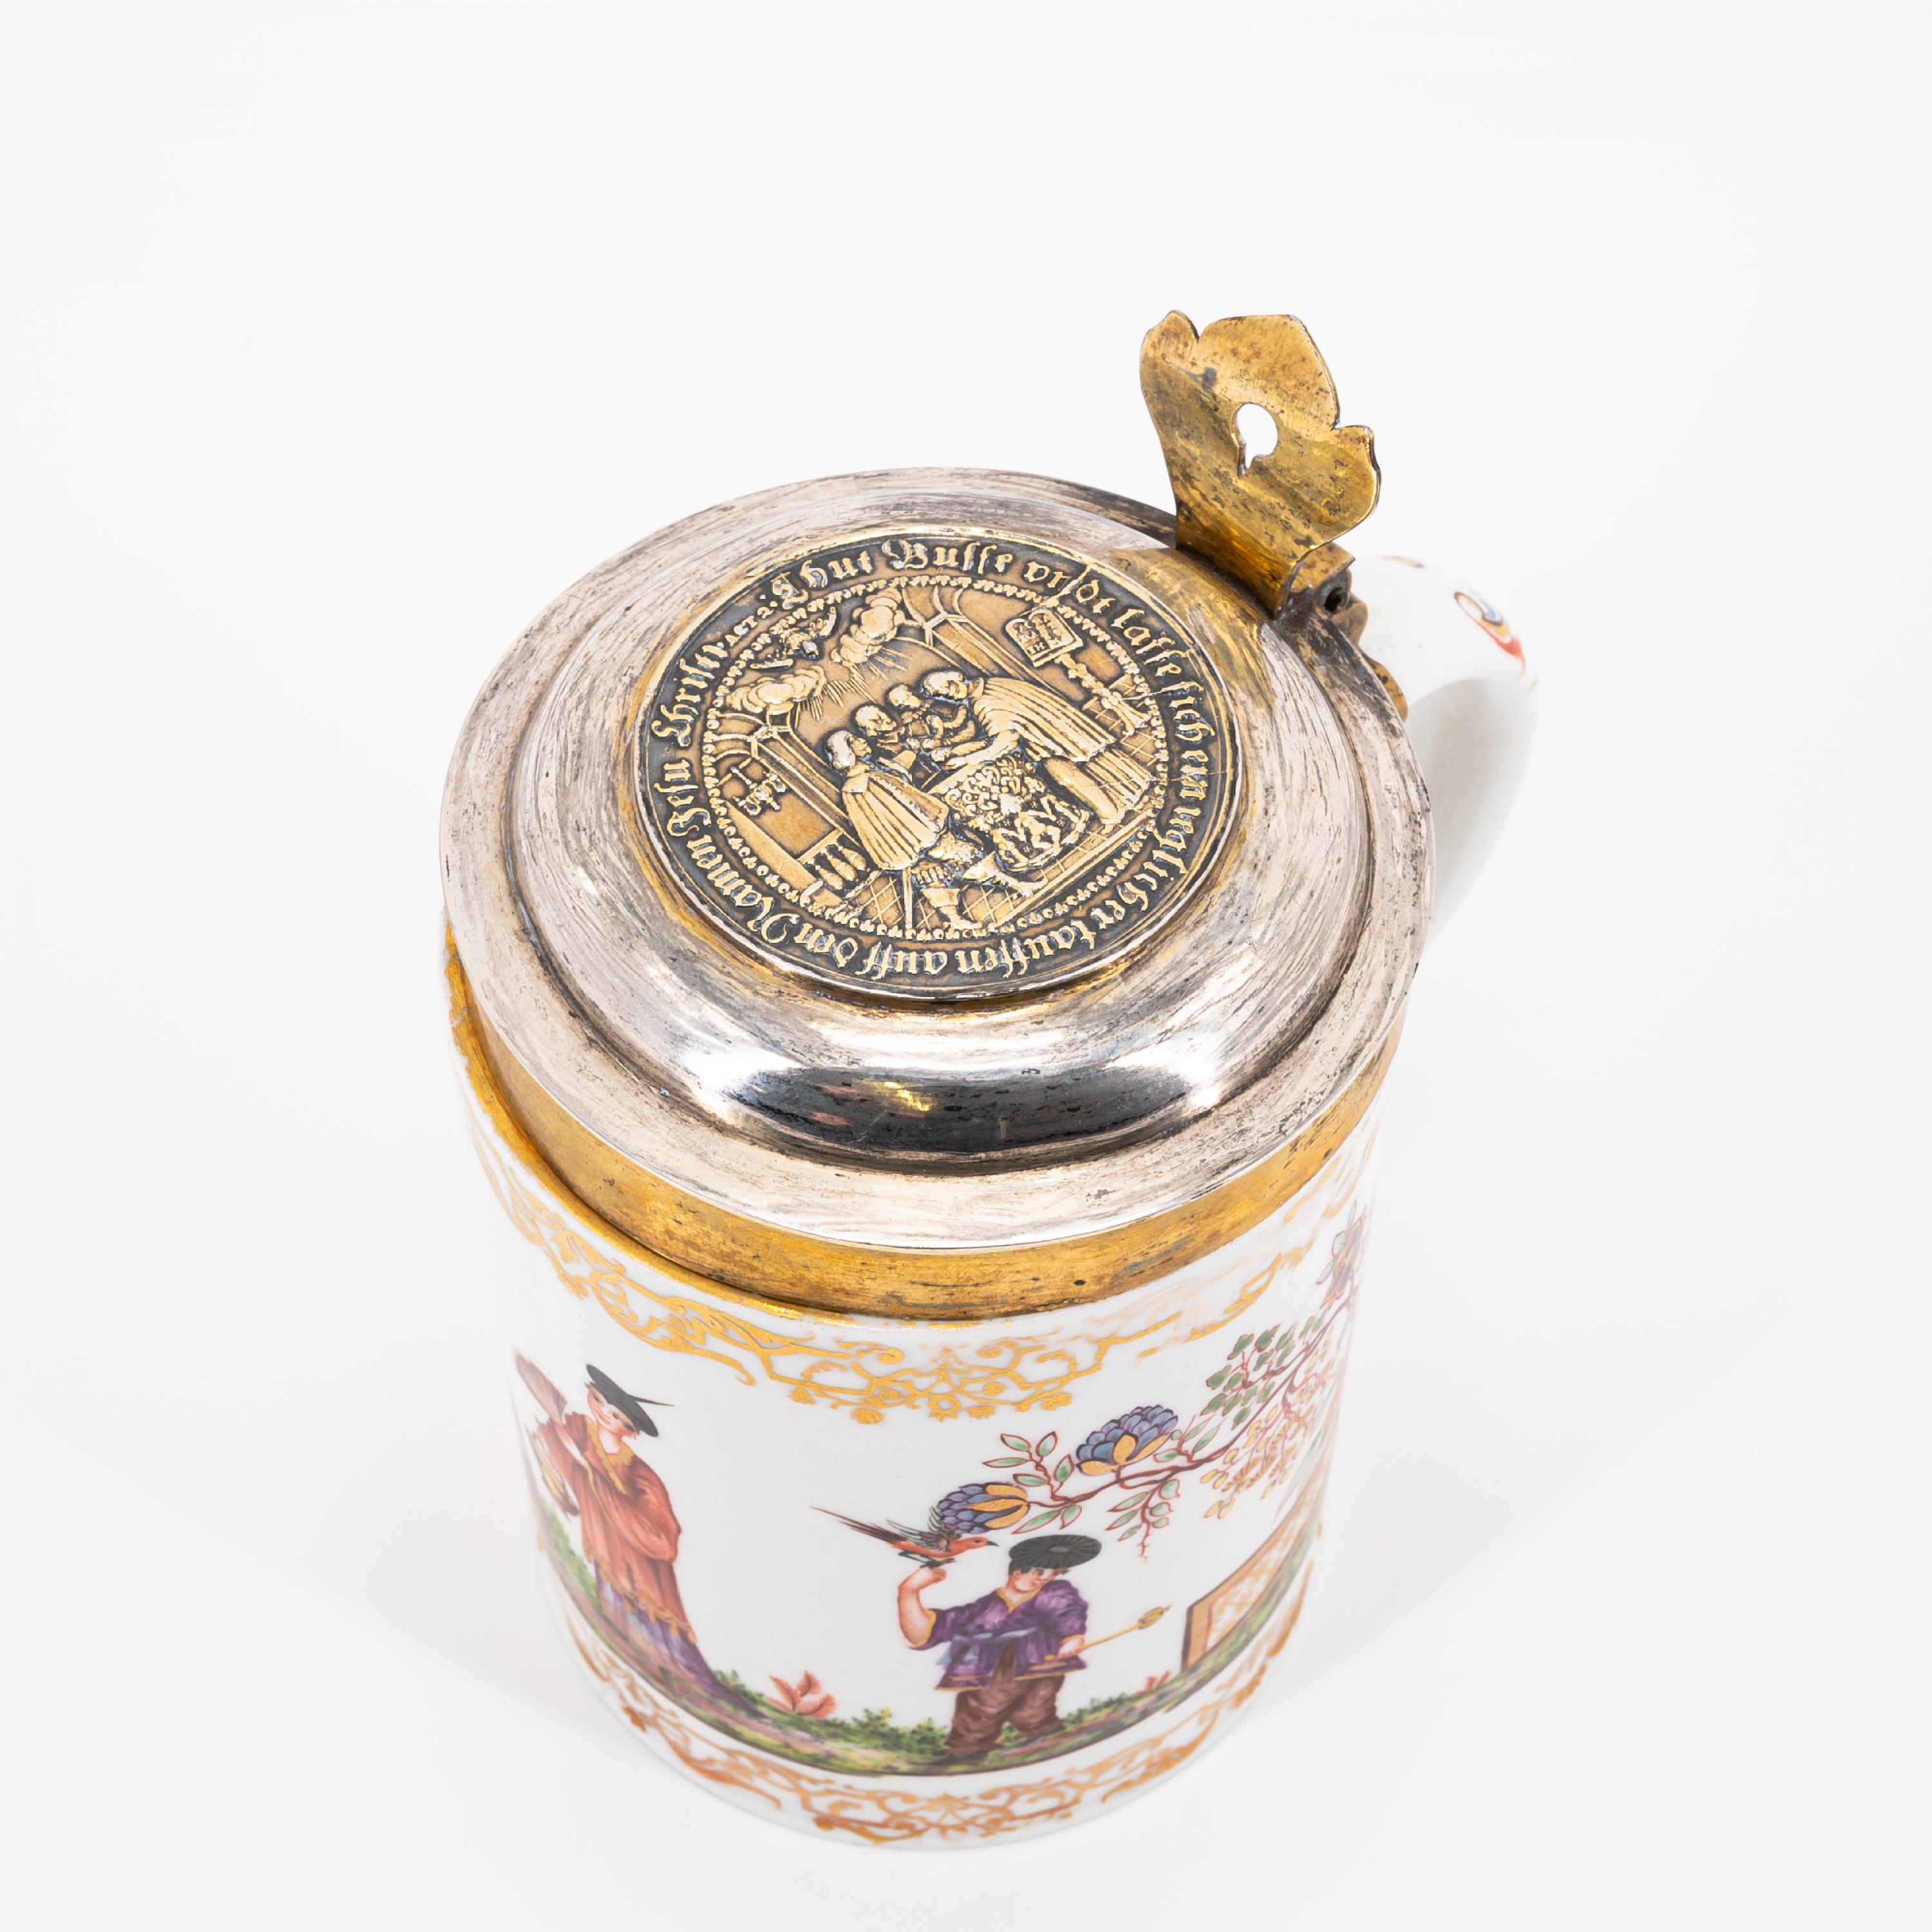 SMALL PORCELAIN 'WALZENKRUG' TANKARD WITH CHINOISERIES - Image 5 of 7